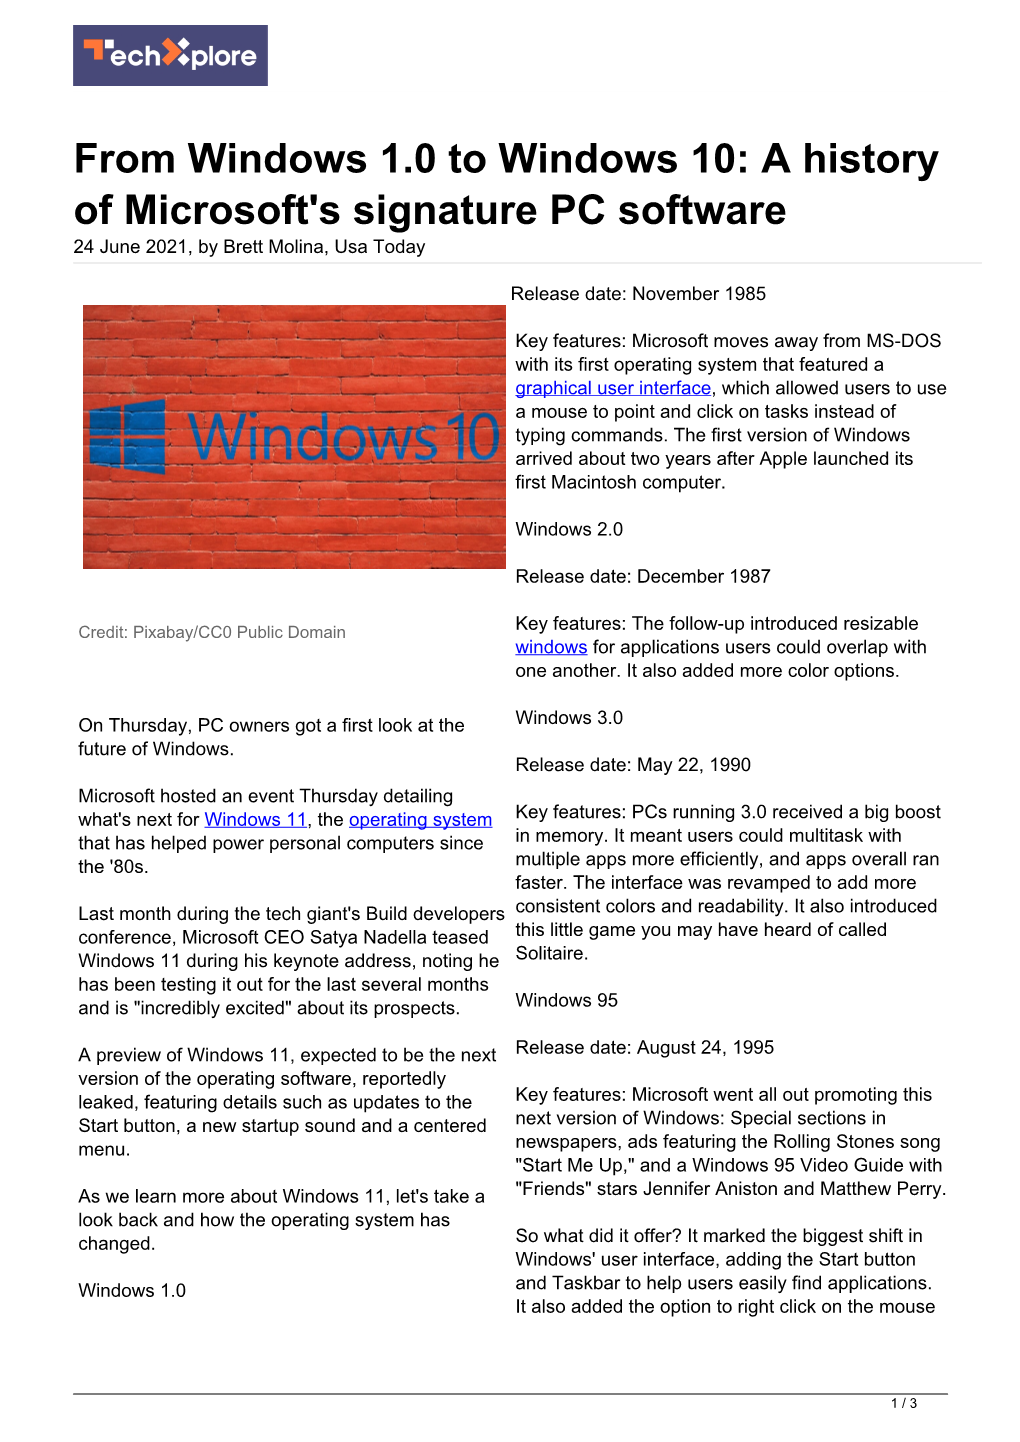 From Windows 1.0 to Windows 10: a History of Microsoft's Signature PC Software 24 June 2021, by Brett Molina, Usa Today